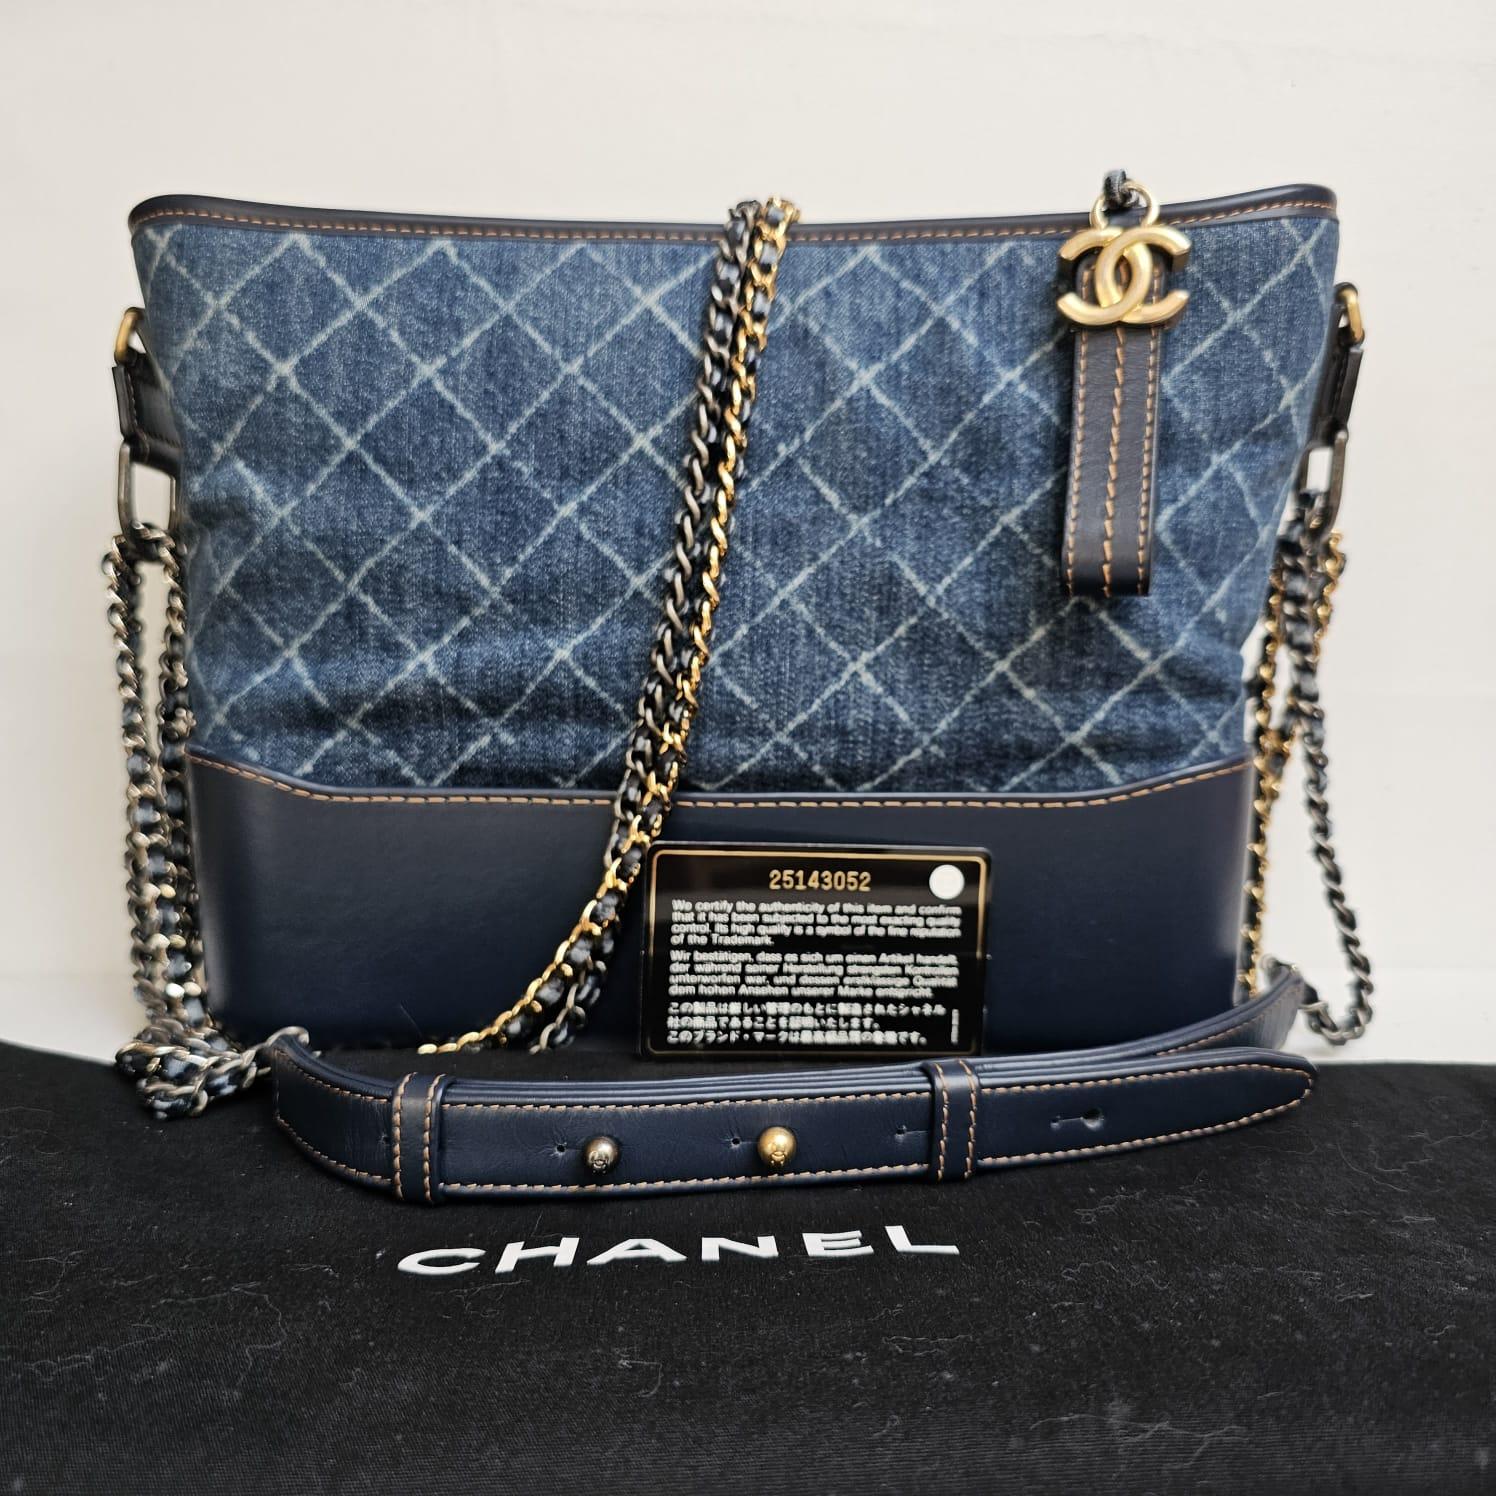 Chanel Medium Denim Quilted Gabrielle Hobo Bag For Sale 7